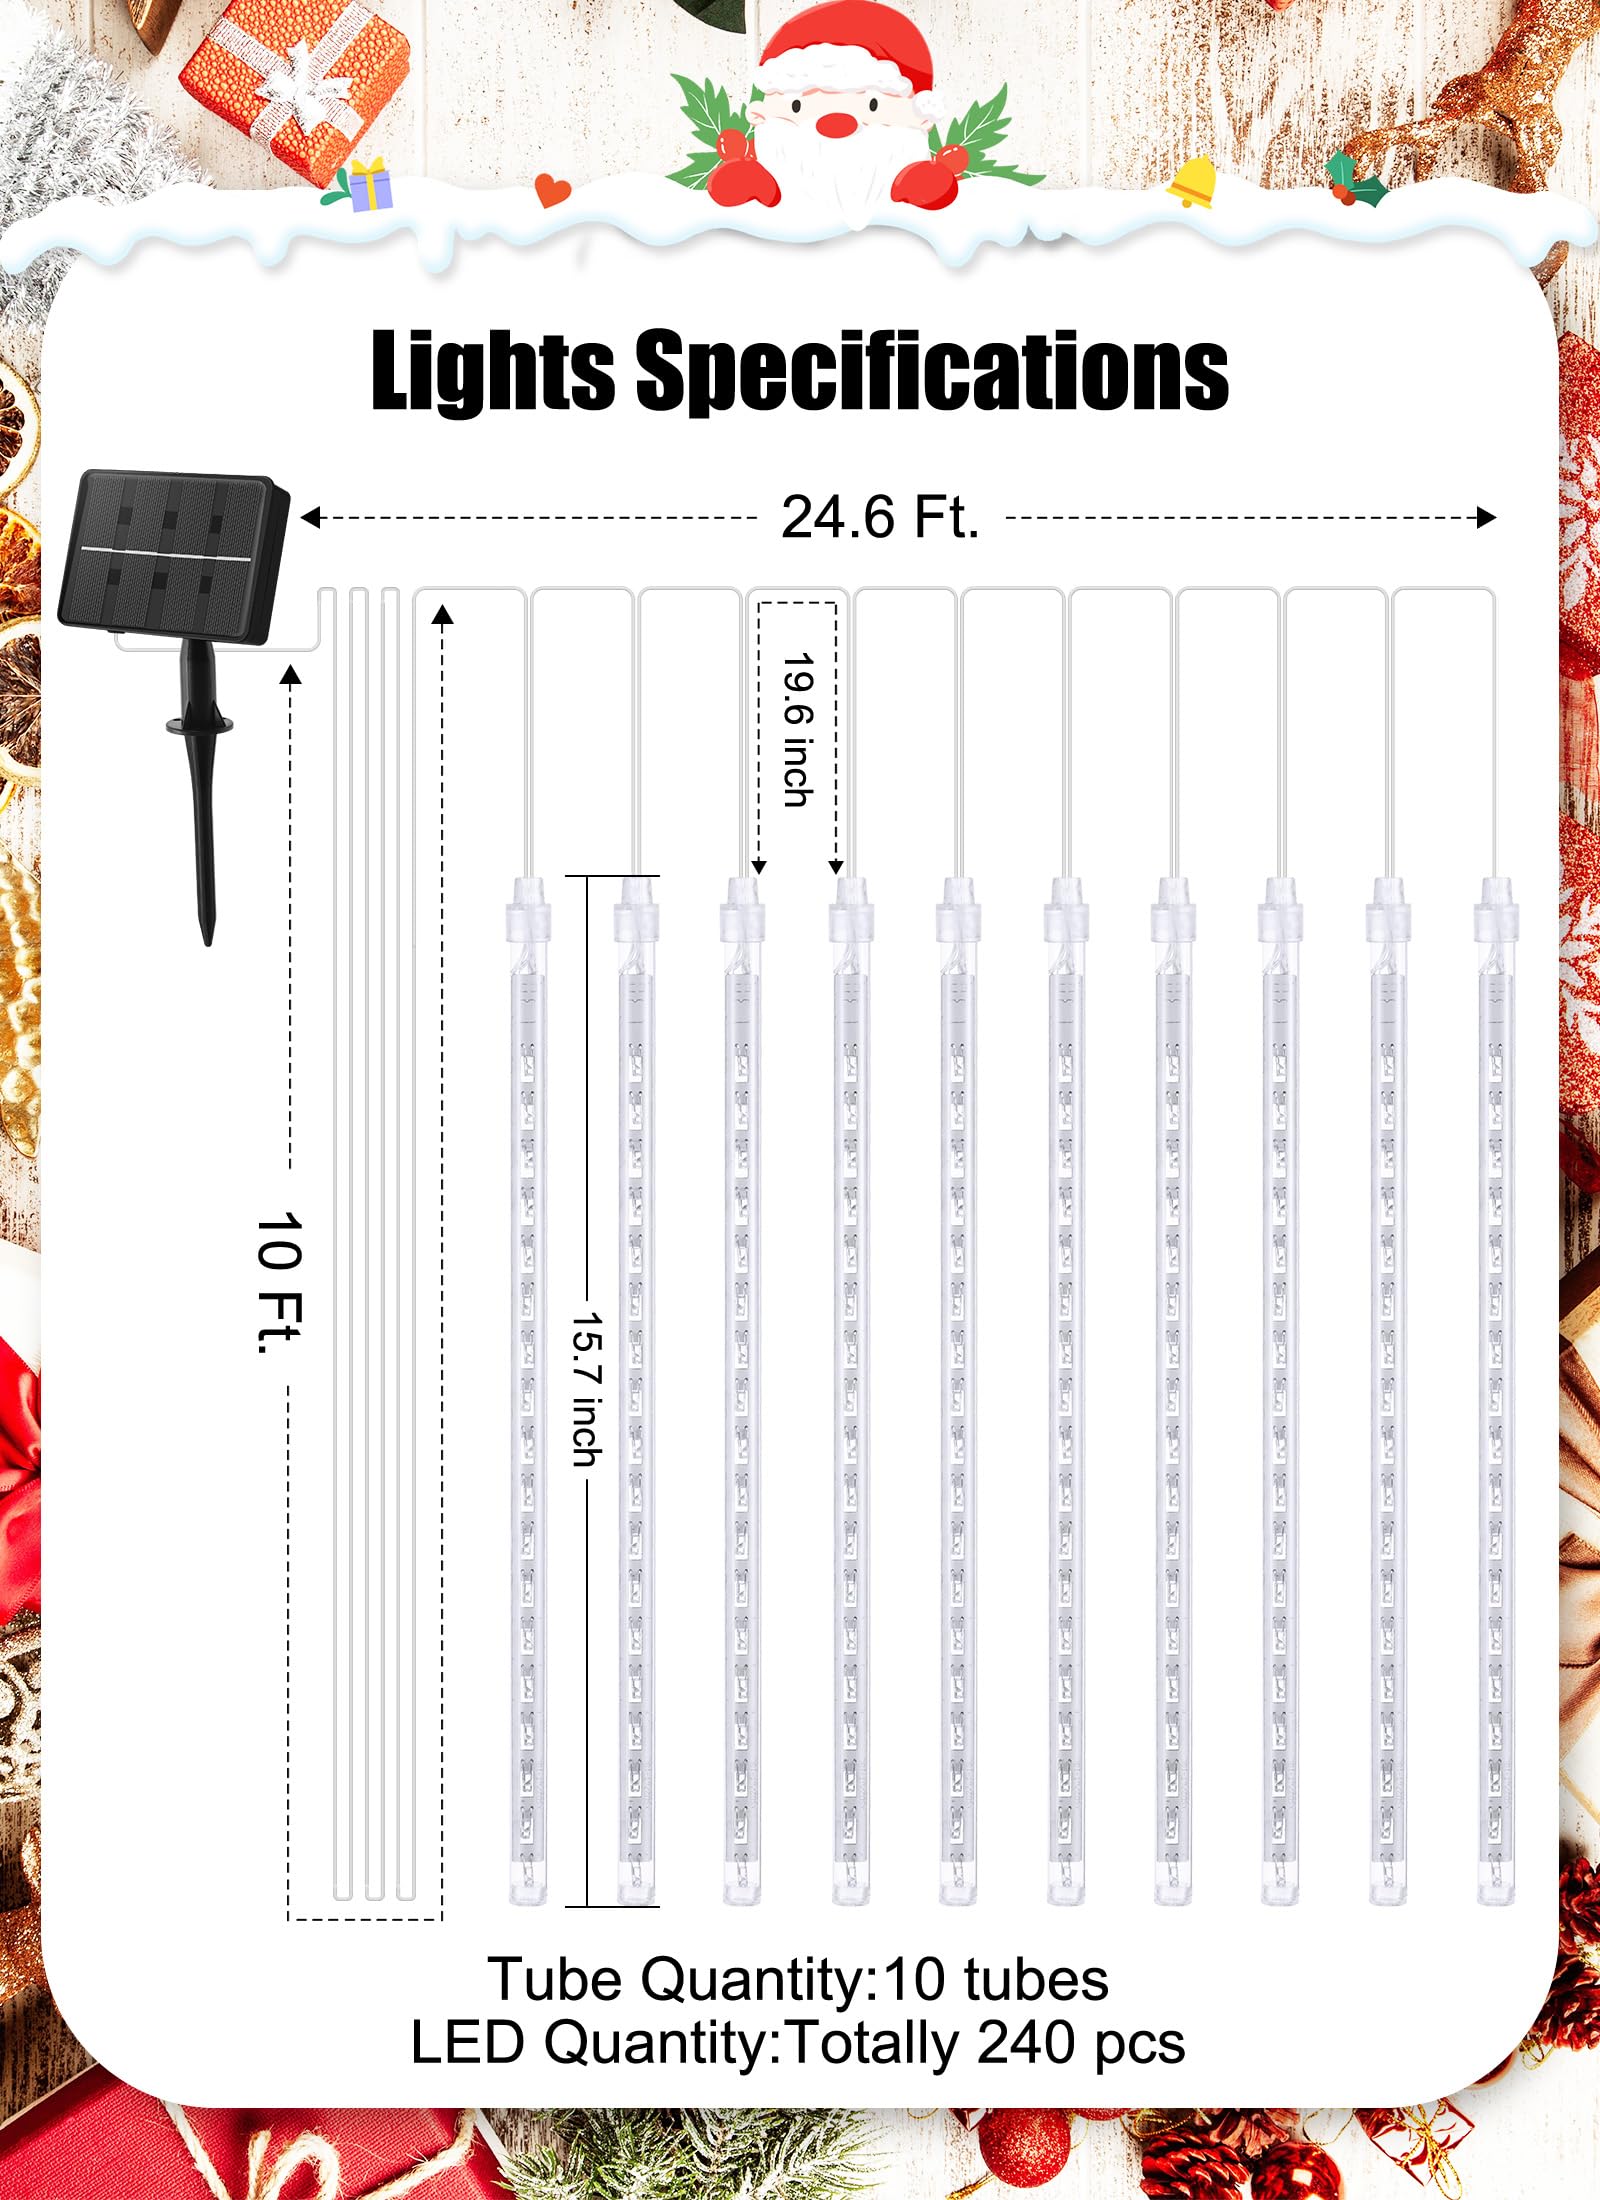 2 x 16 Inches / 10 Tubes / 240 LED / Pure White